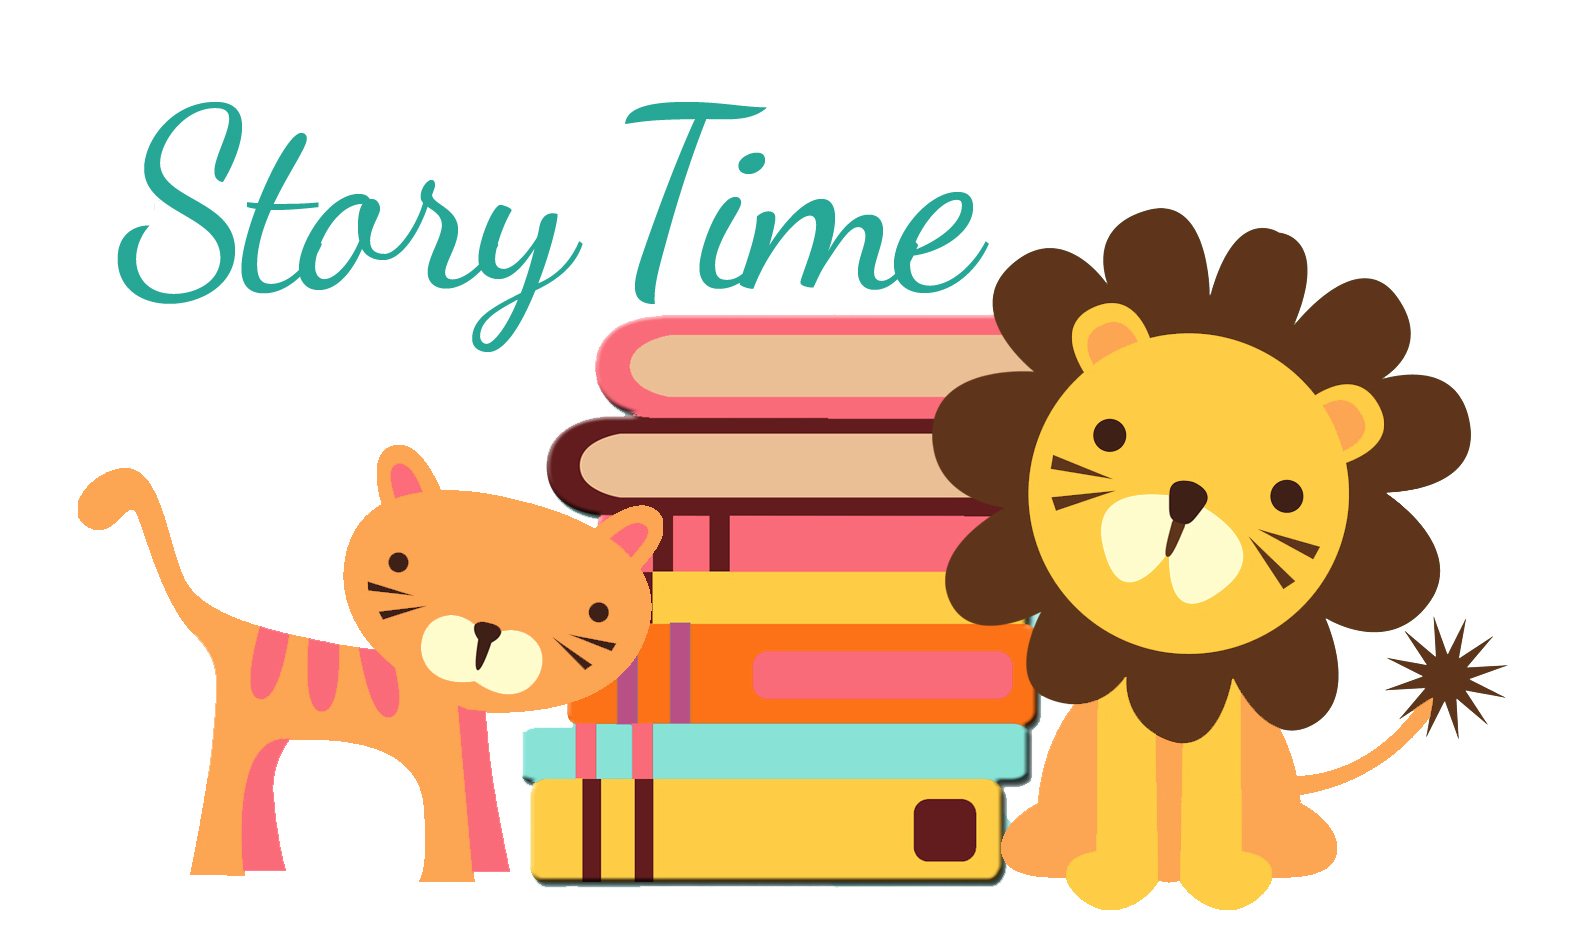 Cartoon image of a stack of books, a little cat and lion and the words "story time" written out.